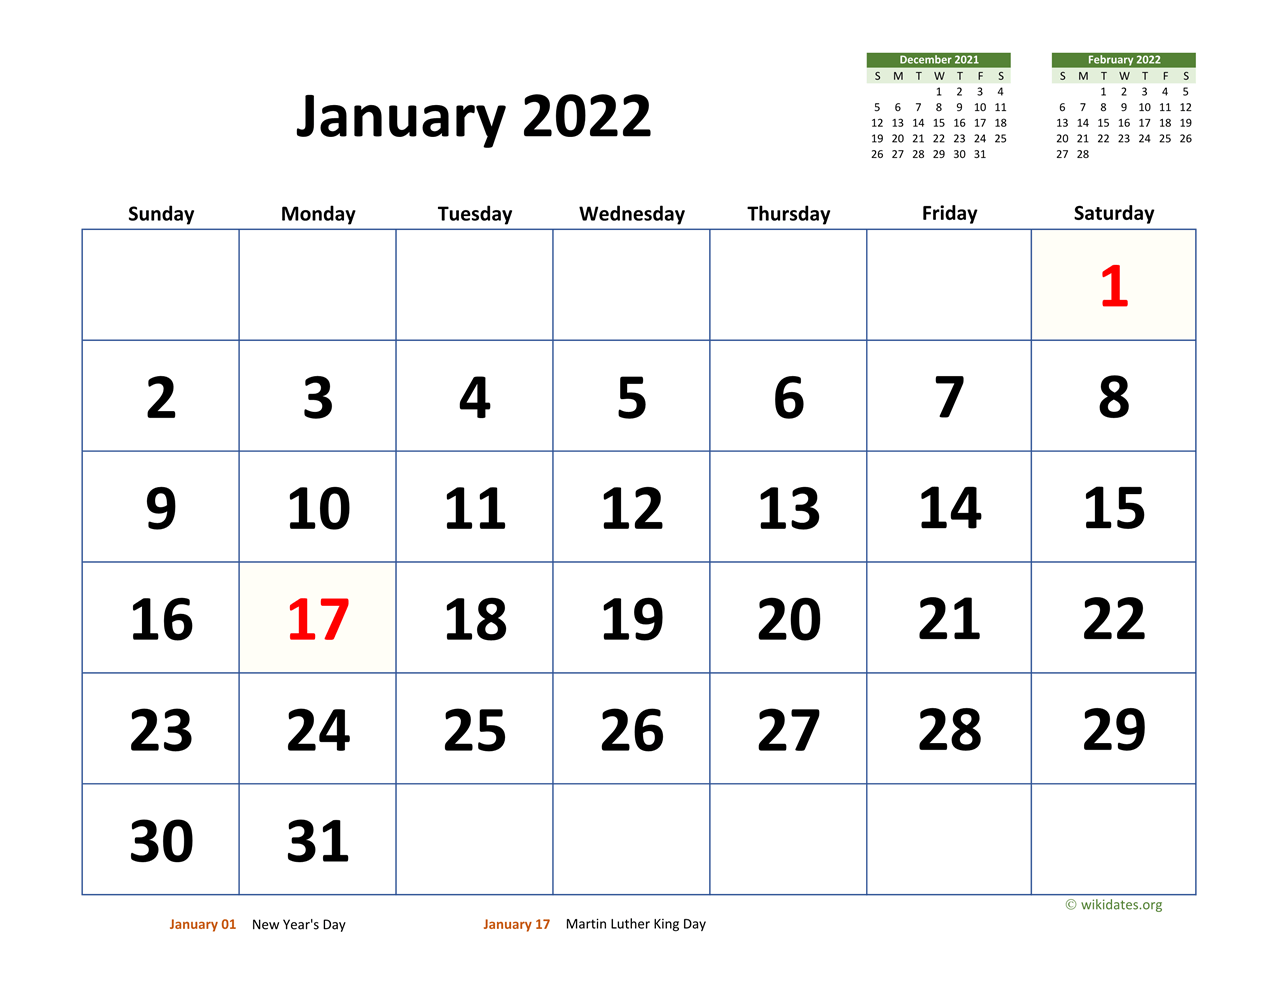 December 2021 And January 2022 Calendar January 2022 Calendar With Extra-Large Dates | Wikidates.org